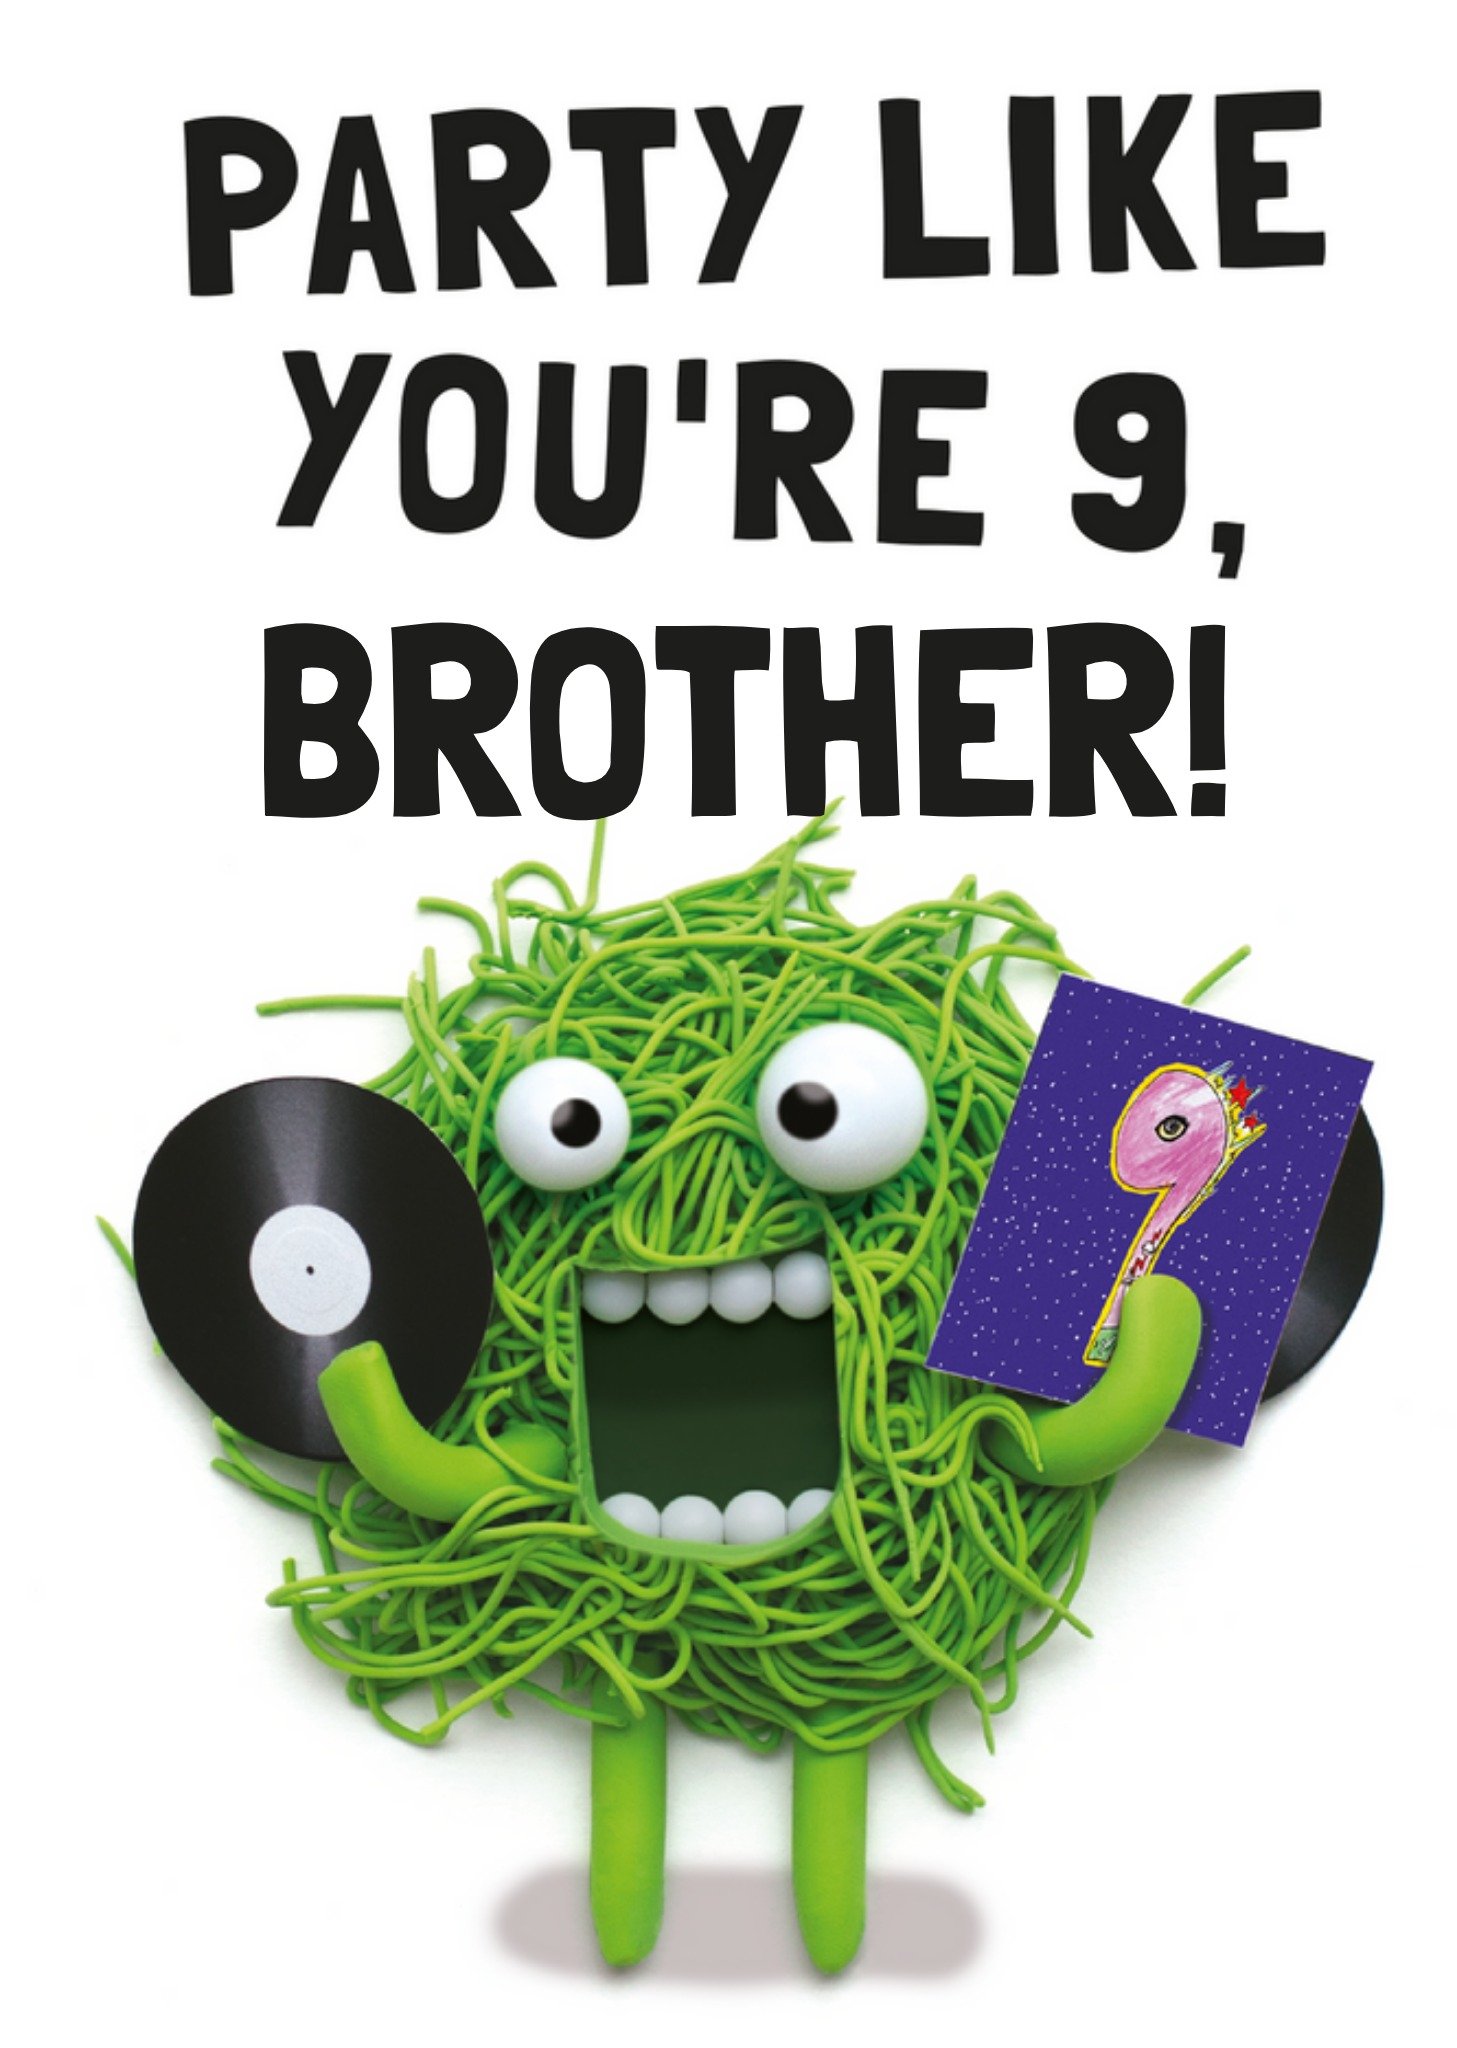 Moonpig Fun Party Like You're 9 Brother Illustrated Green Spaghetti Moster Vinyl Record Birthday Car